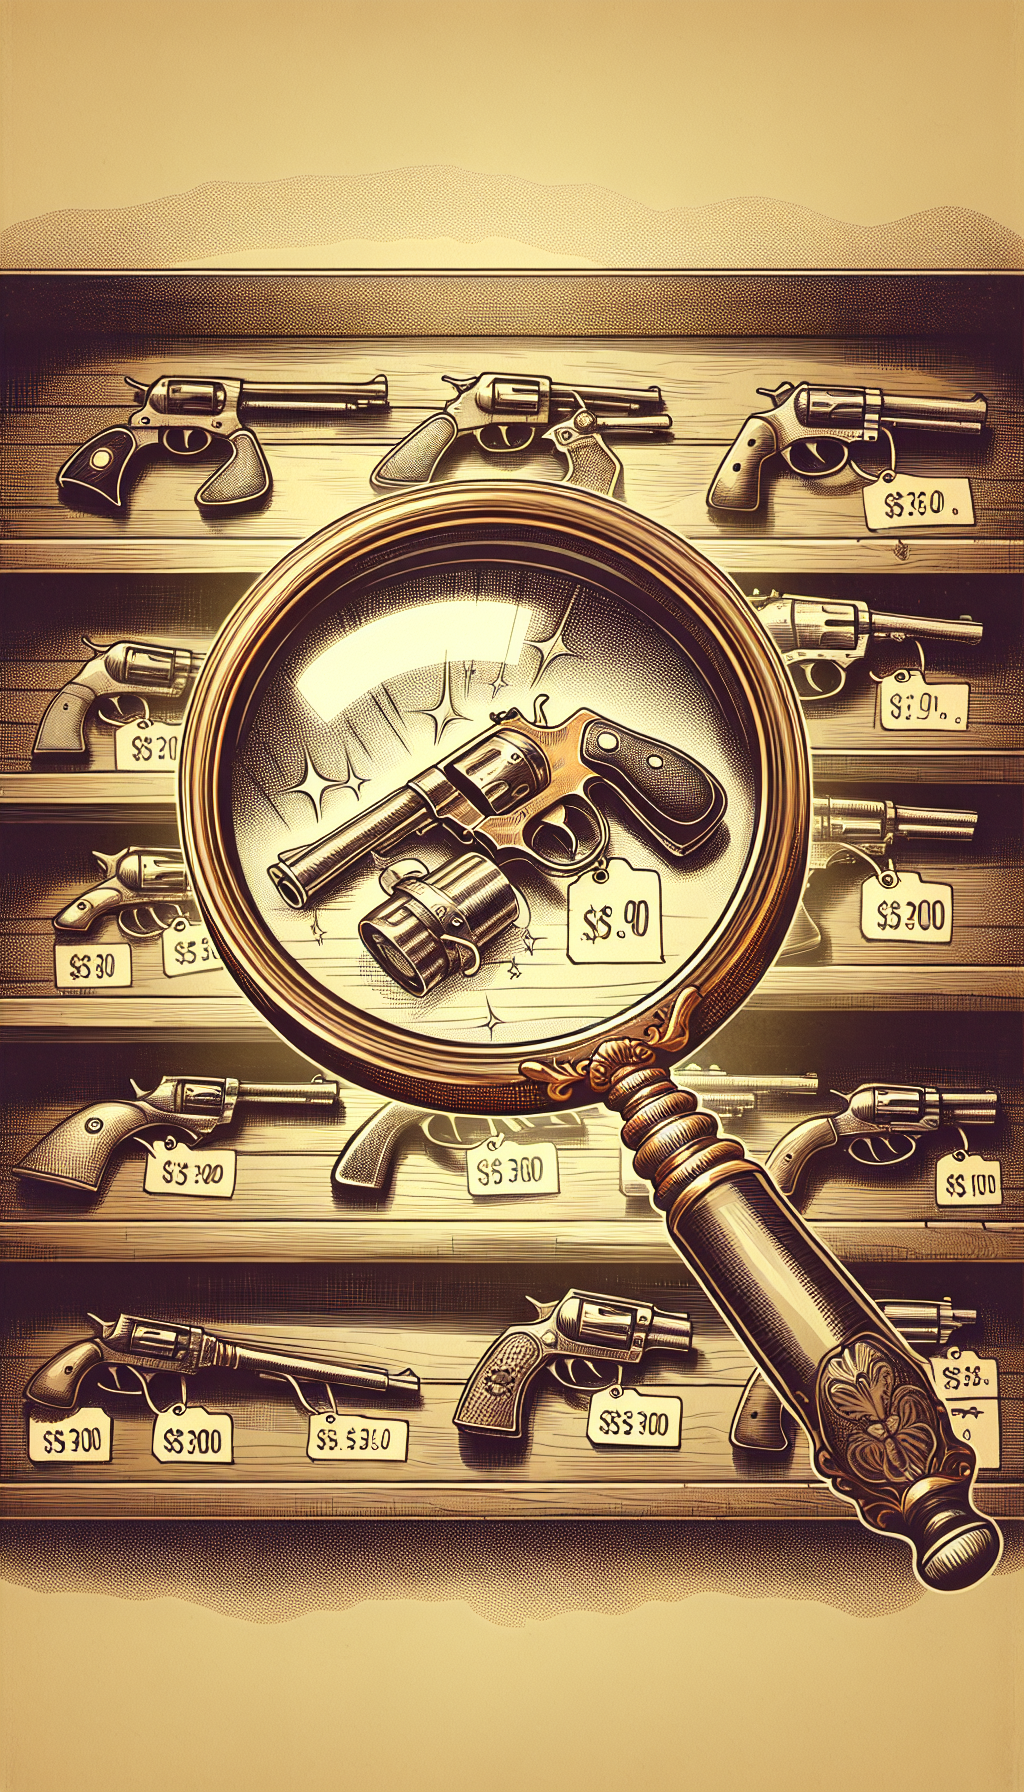 An illustration depicting a vintage magnifying glass hovering over a collection of antique toy guns neatly displayed on a wooden shelf. Under the glass, the toys gleam and transform showing price tags with various high-value amounts, with one toy highlighted and its price glowing, signifying its exceptional worth. The image is styled with sepia tones and inked outlines to evoke a nostalgic, classic feel.